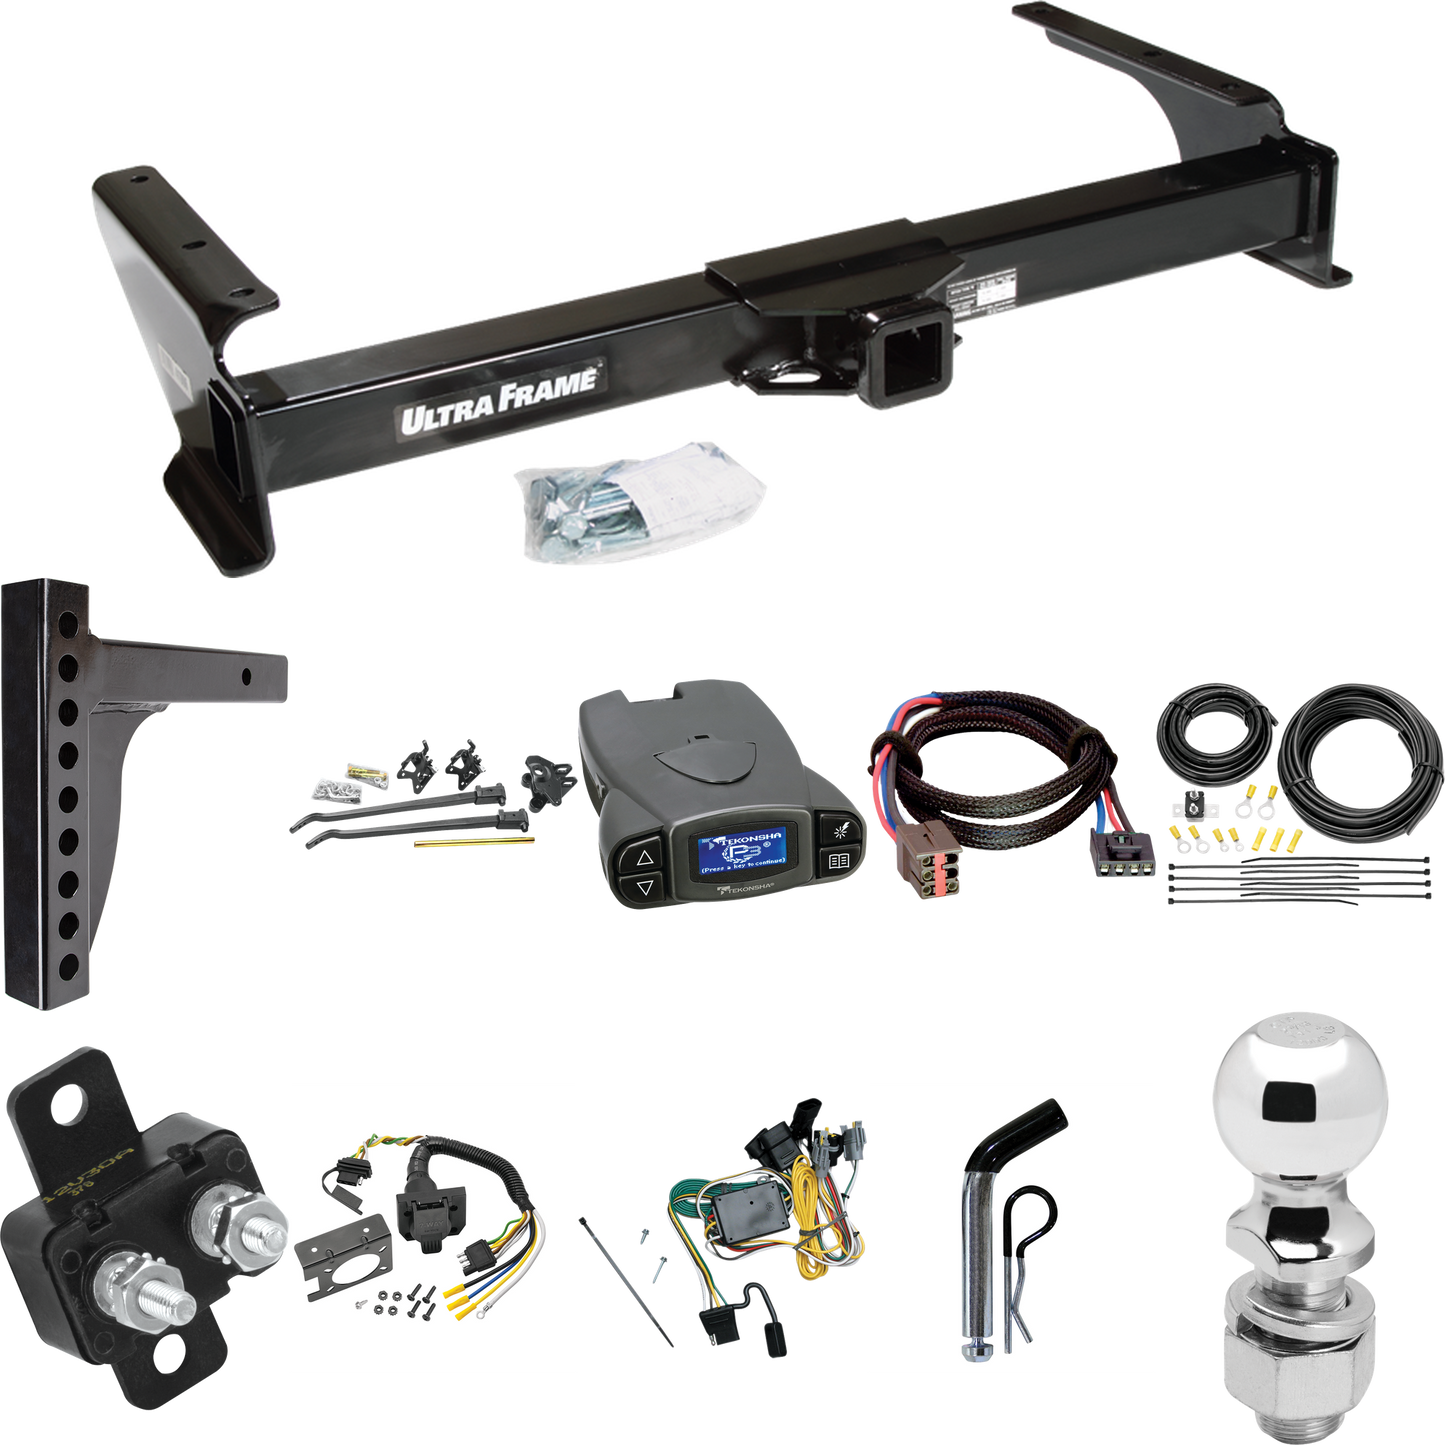 Fits 1992-1994 Ford E-250 Econoline Trailer Hitch Tow PKG w/ 12K Trunnion Bar Weight Distribution Hitch + Pin/Clip + 2-5/16" Ball + Tekonsha Prodigy P3 Brake Control + Plug & Play BC Adapter + 7-Way RV Wiring By Draw-Tite